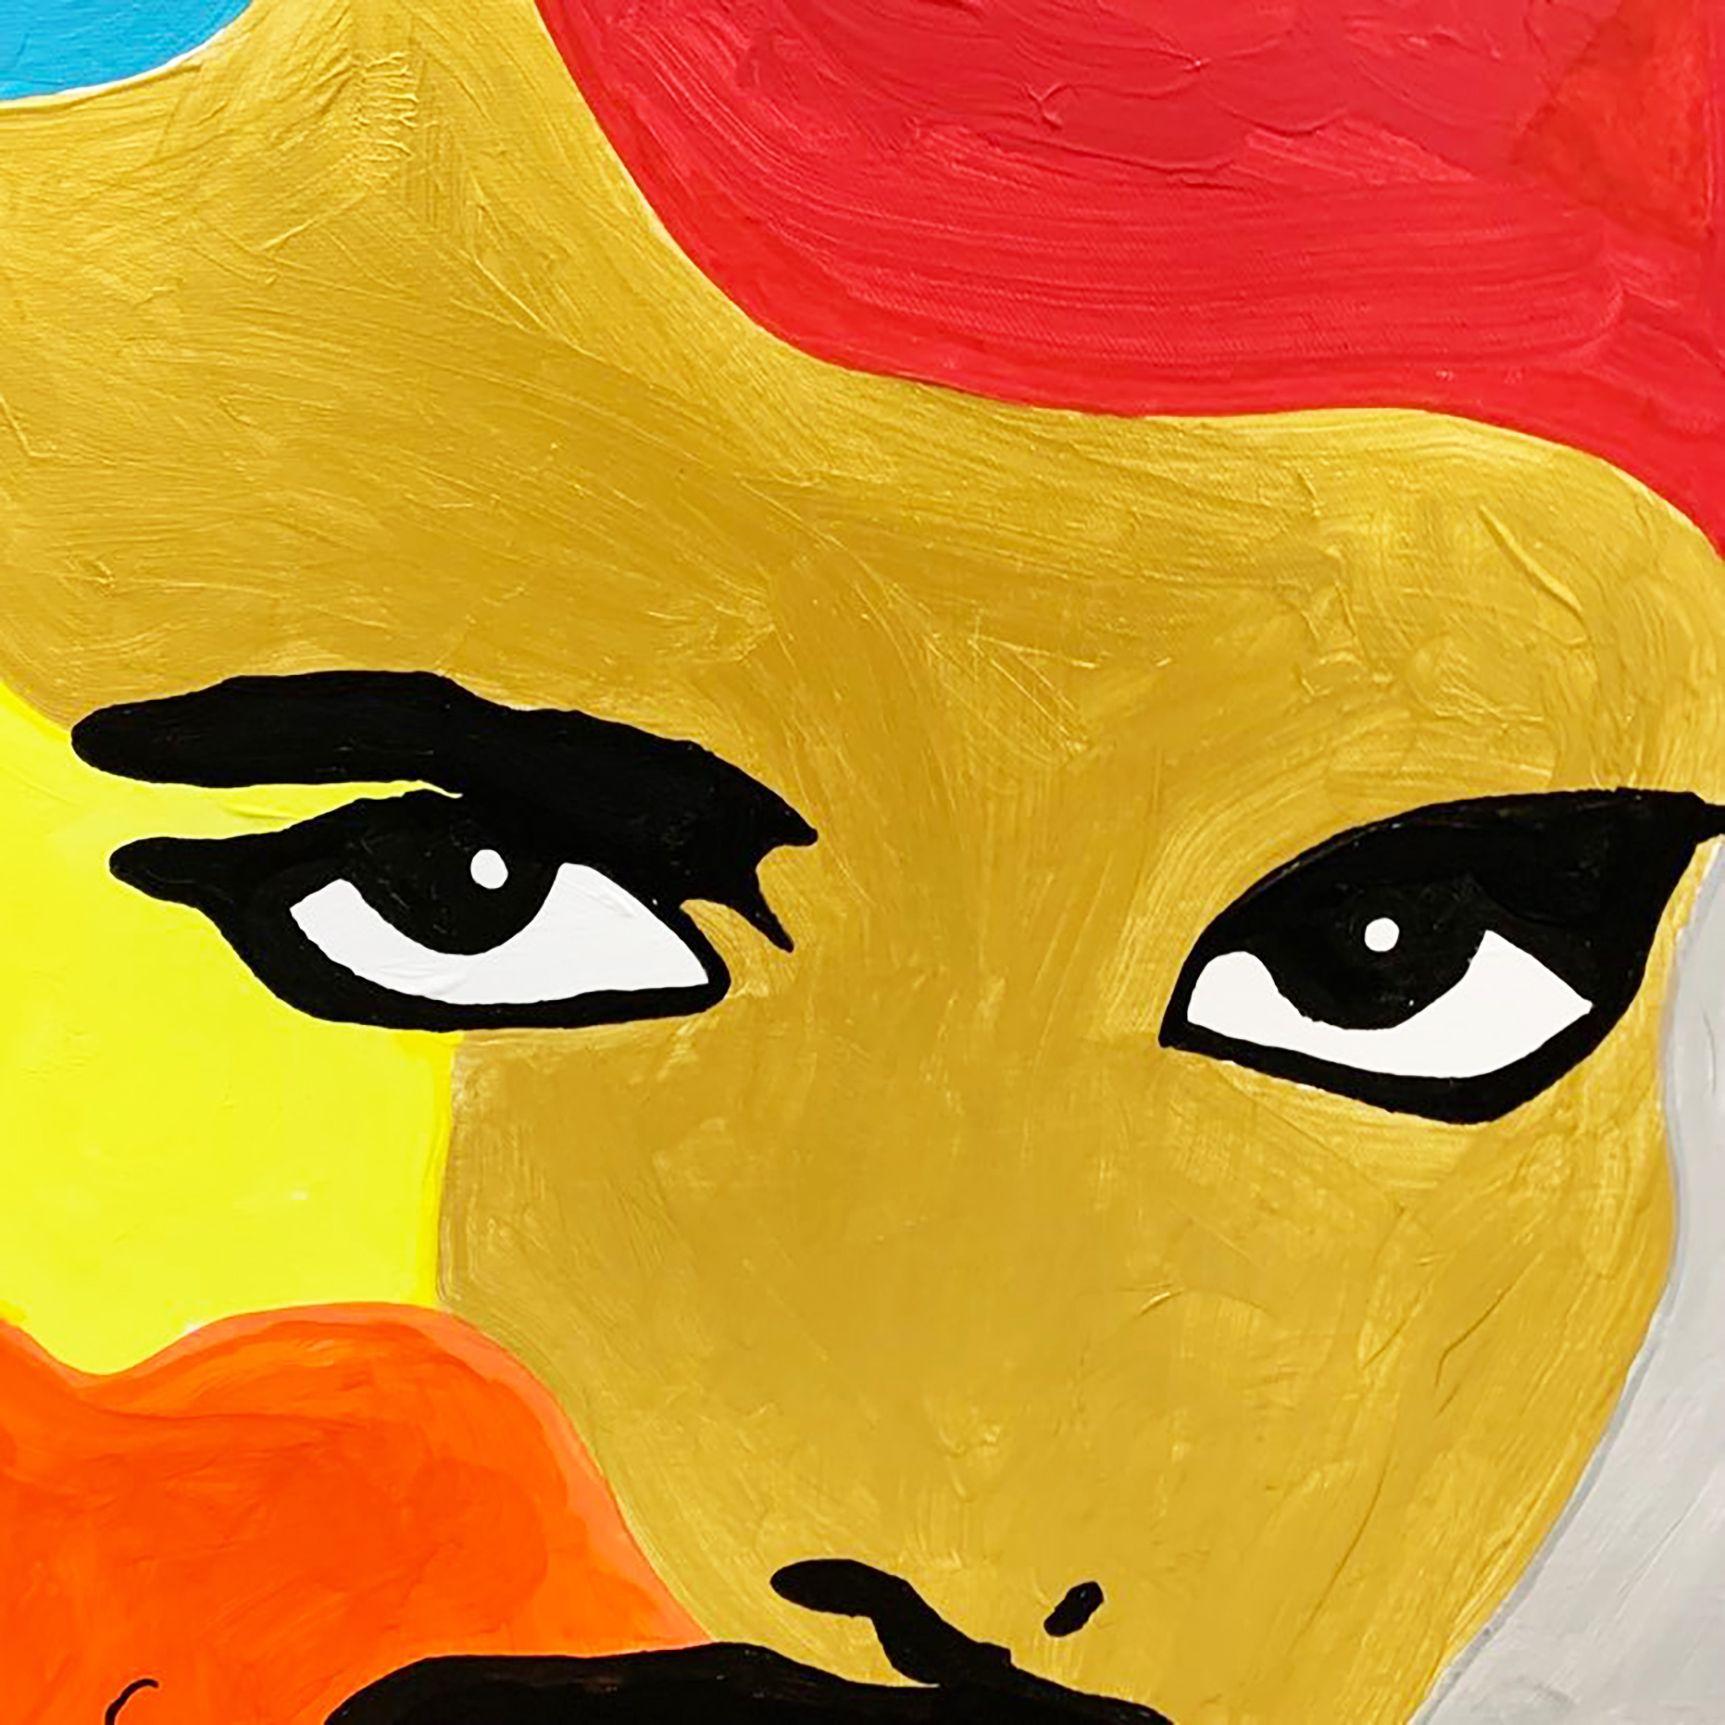 Freddie Mercury, frontman of the rock band QUEEN.    Acrylic and oil on canvas.    30in x 30in (76cm x 76cm). :: Painting :: Pop-Art :: This piece comes with an official certificate of authenticity signed by the artist :: Ready to Hang: Yes ::